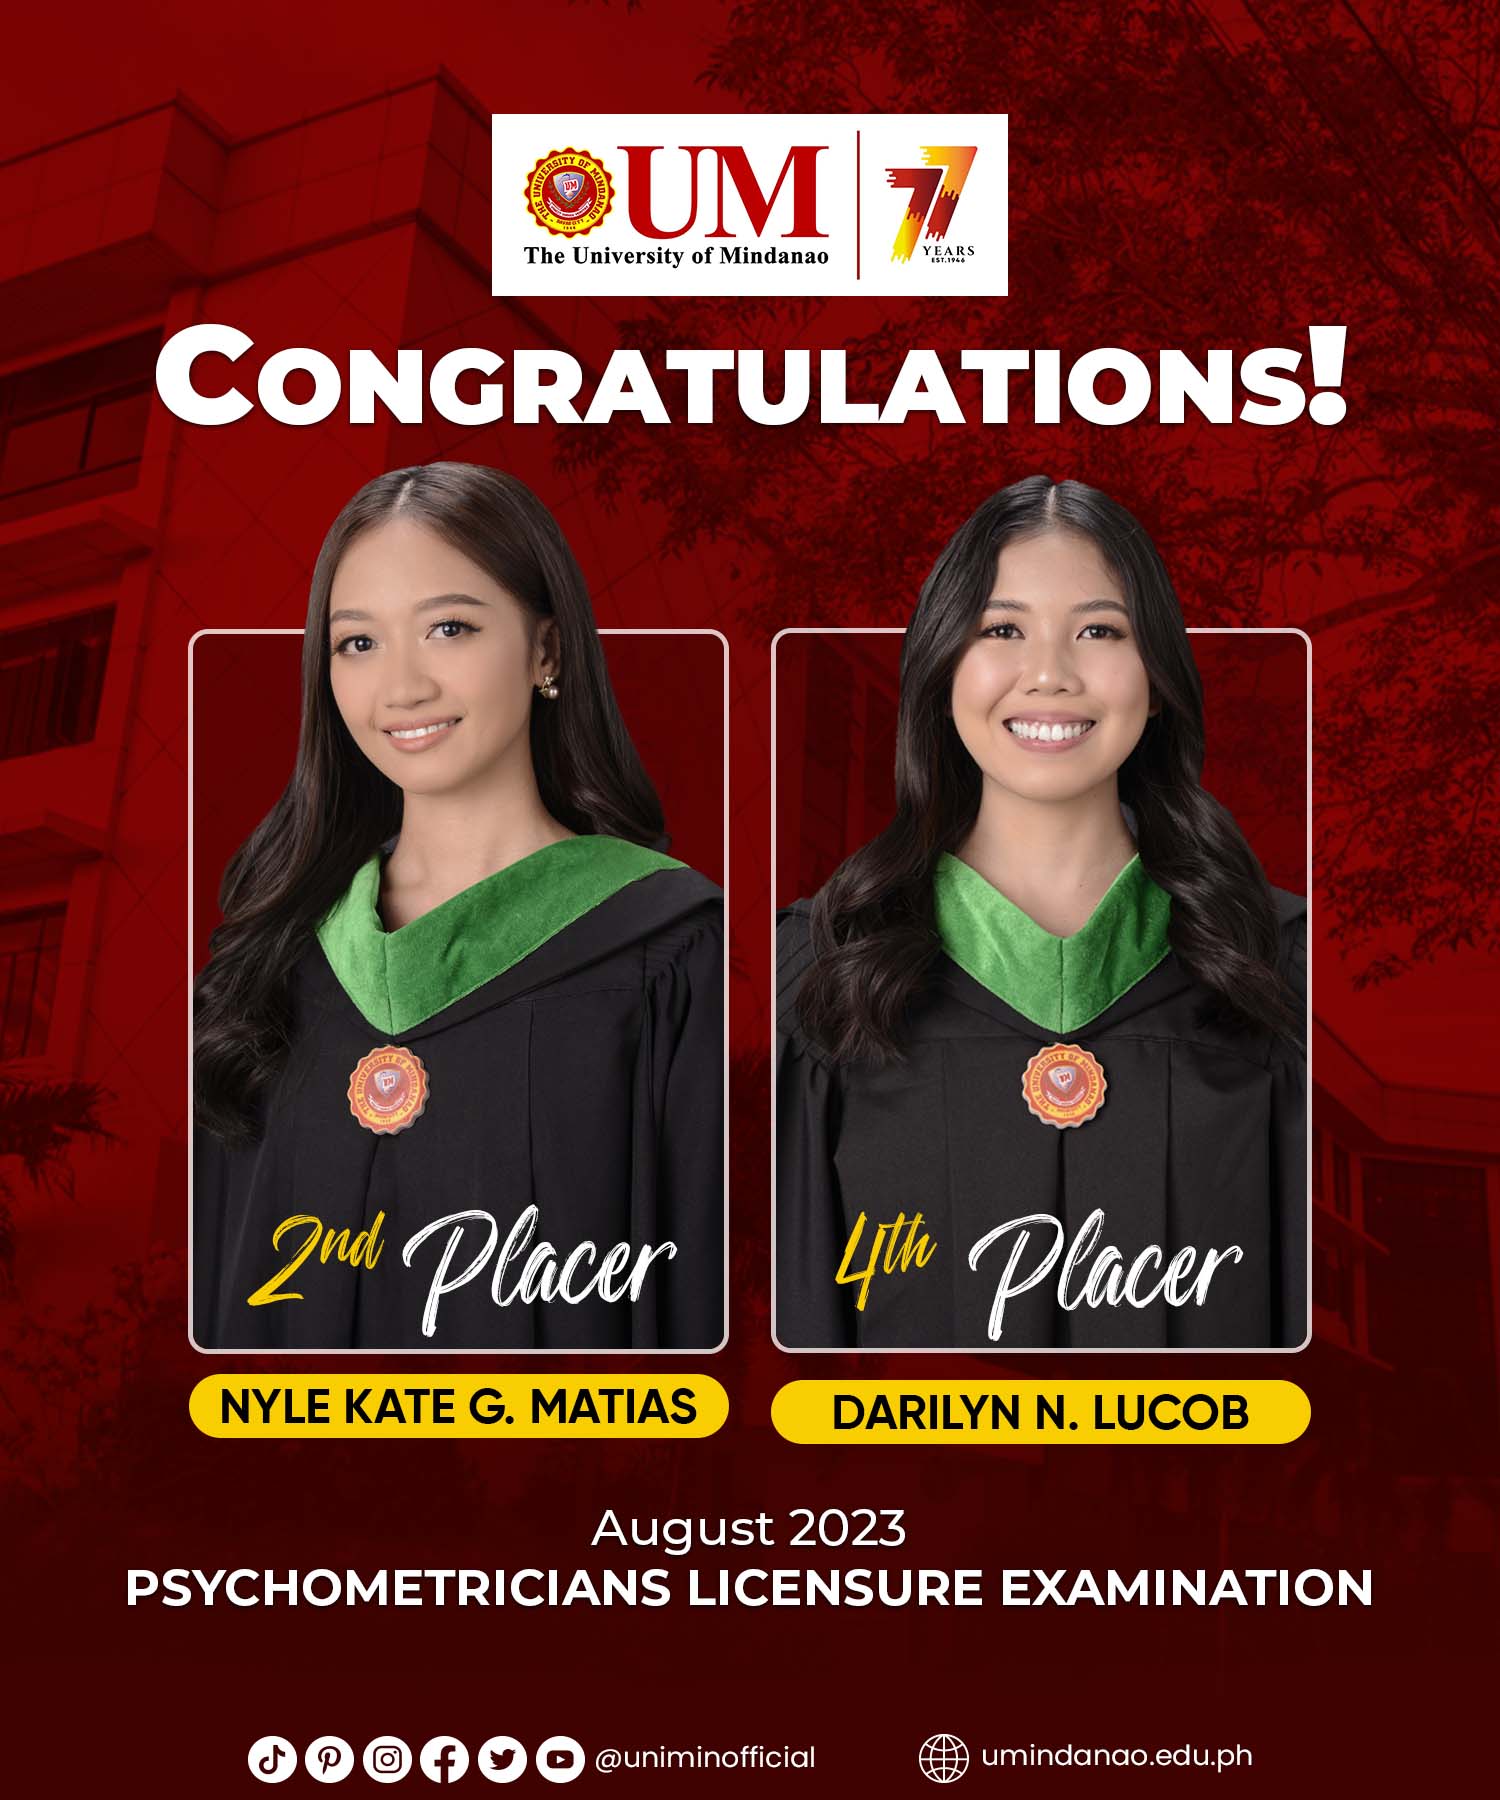 UMians in top spots for August 2023 Psychometrician Licensure Exam